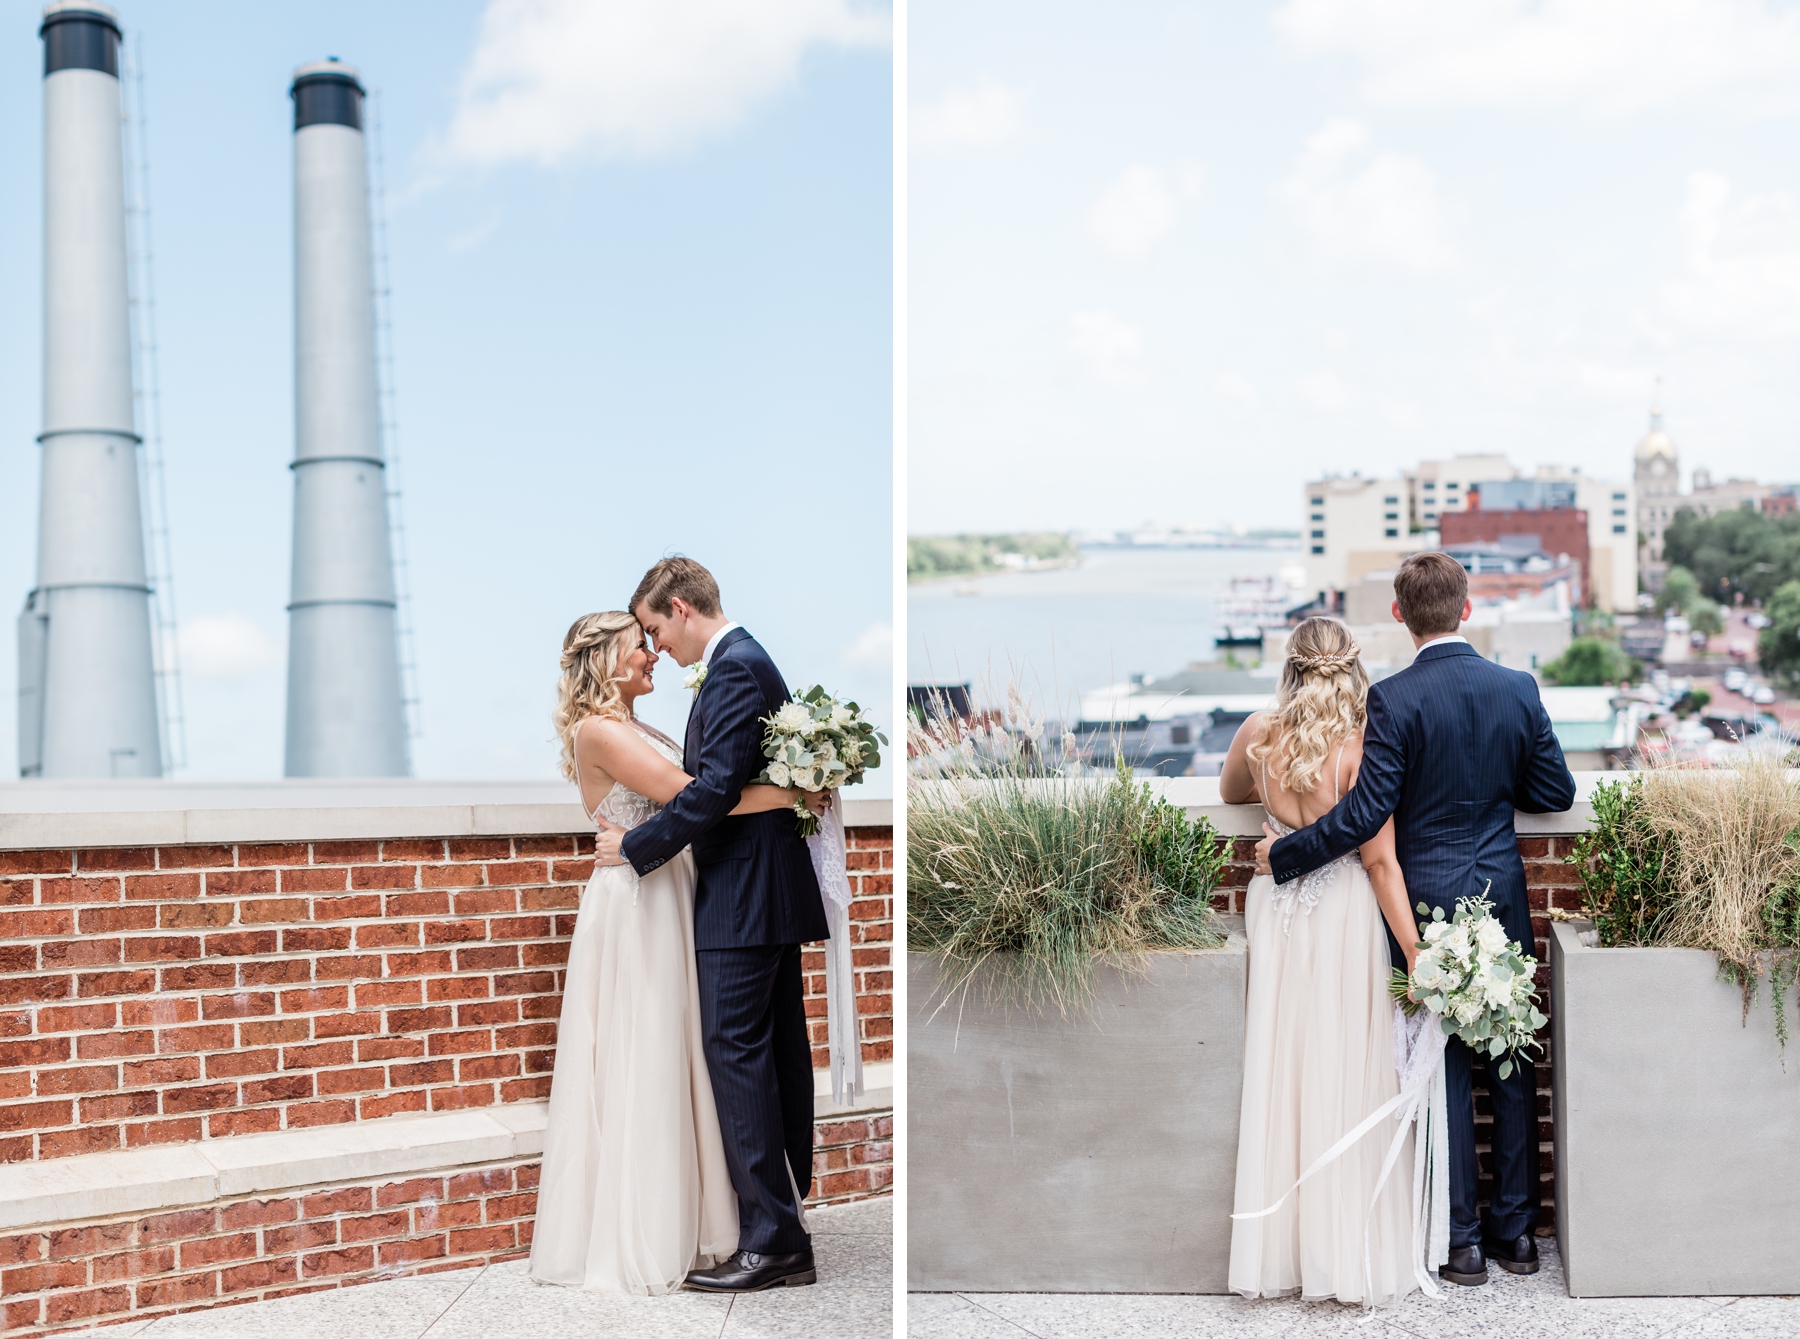 Rebecca and Richard’s rooftop elopement at The Alida Hotel in Savannah